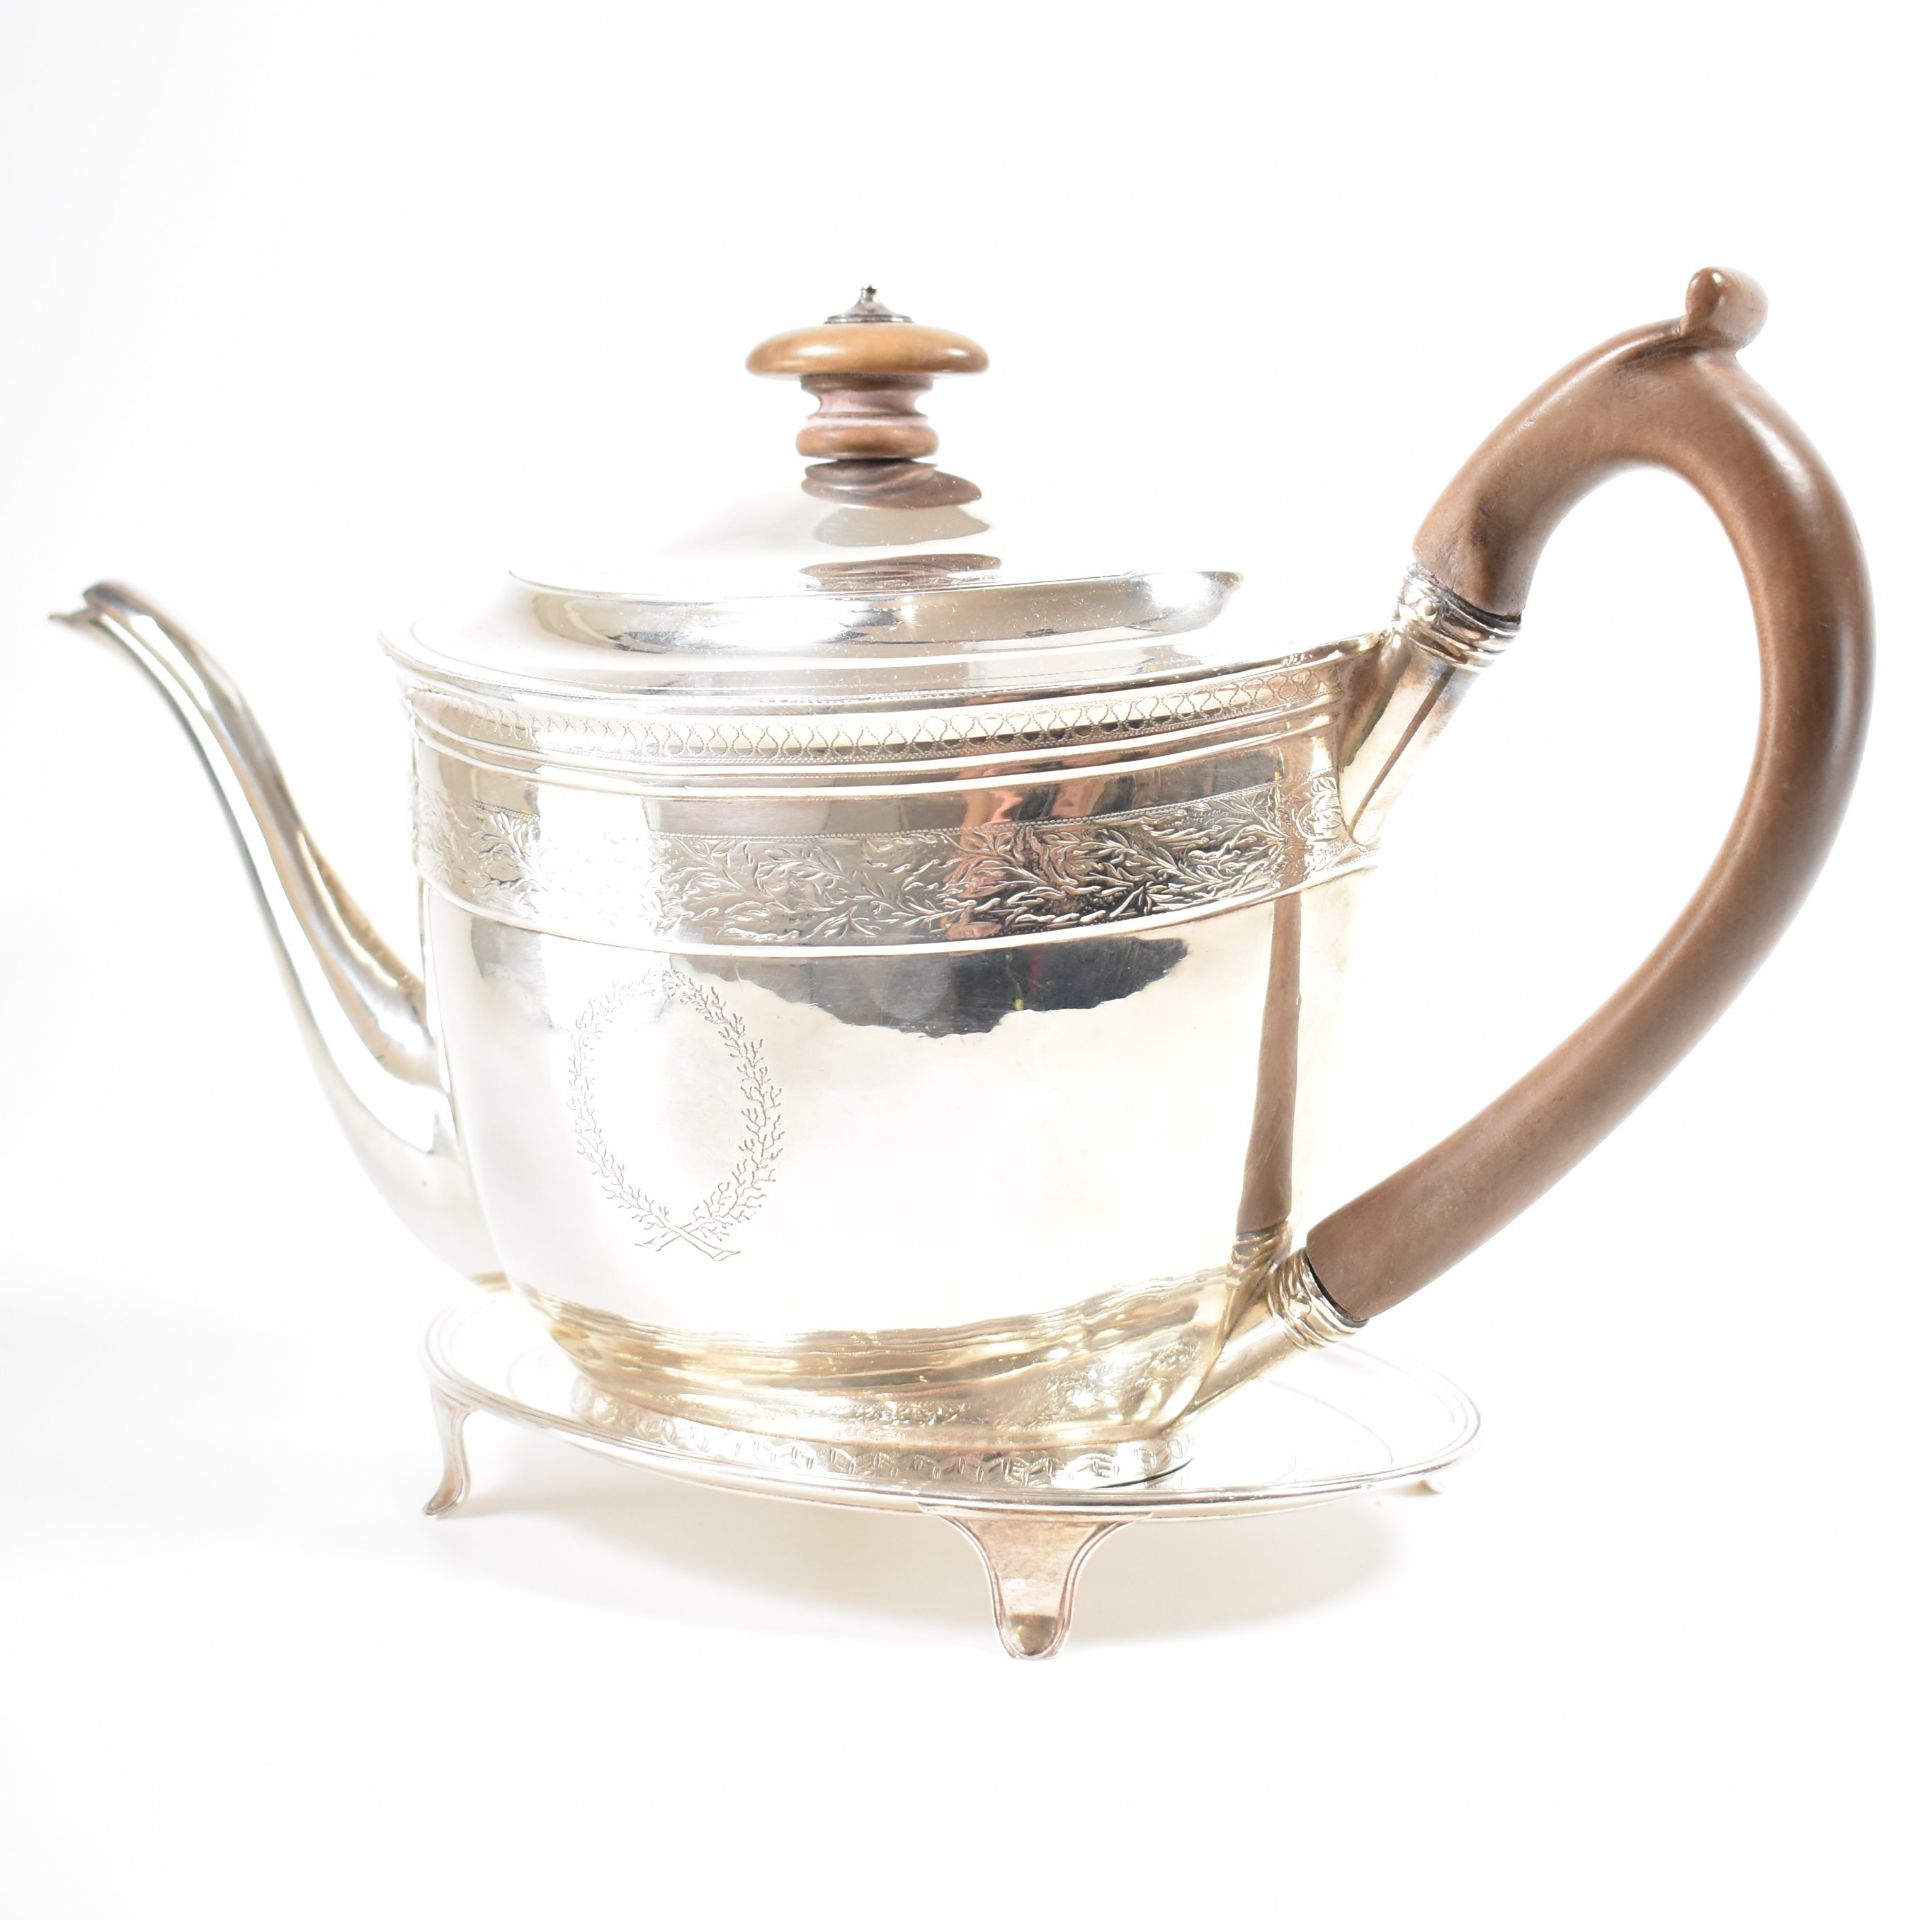 GEORGE III HALLMARKED SILVER TEAPOT & STAND - Image 5 of 7